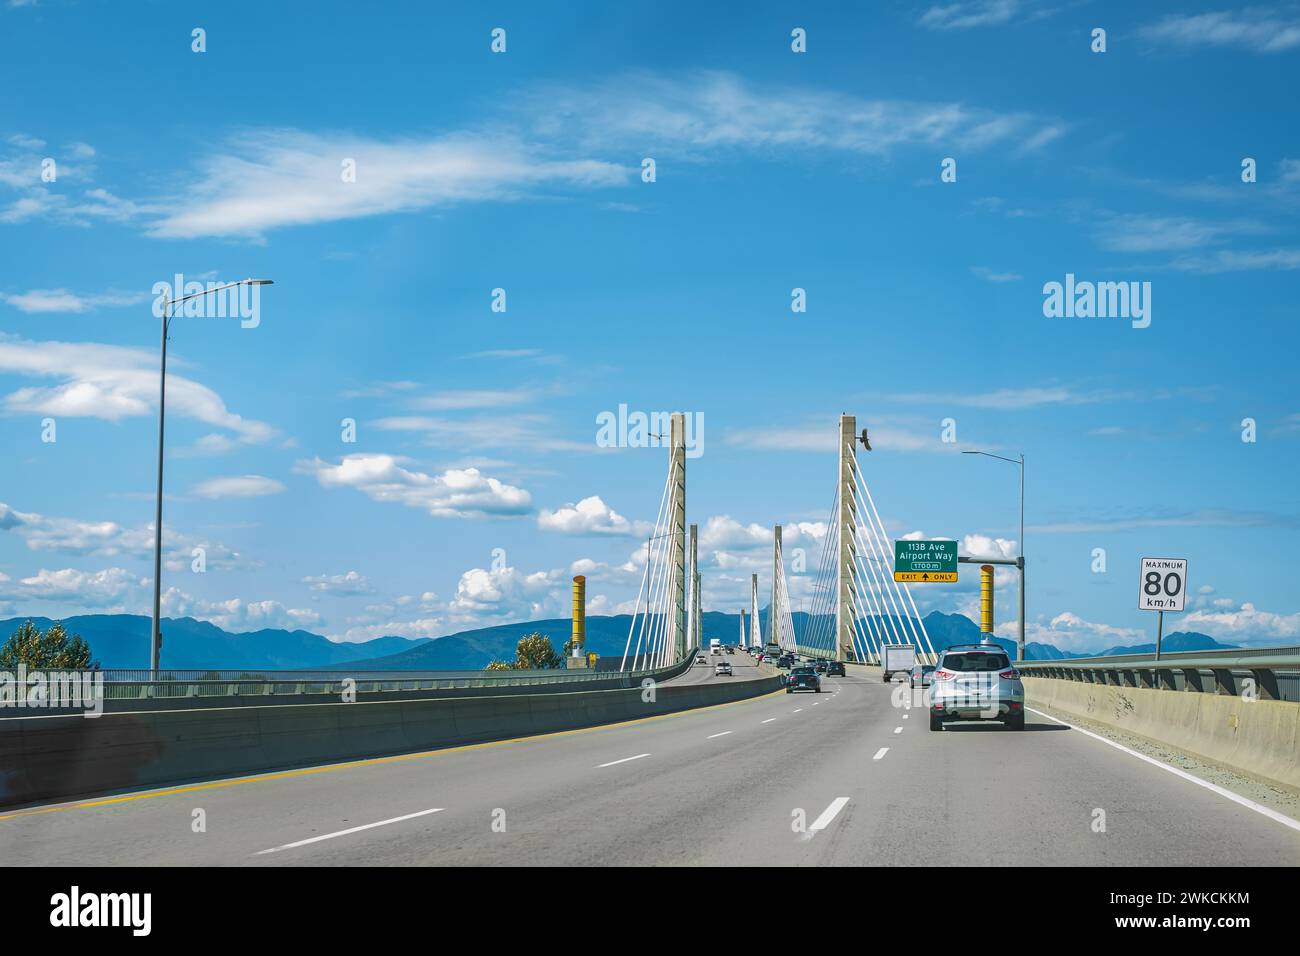 Golden Ears Bridge, connecting Maple Ridge to Langley. Traffic on a cable-suspended bridge spanning across Fraser River on a sunny summer day. Vancouv Stock Photo